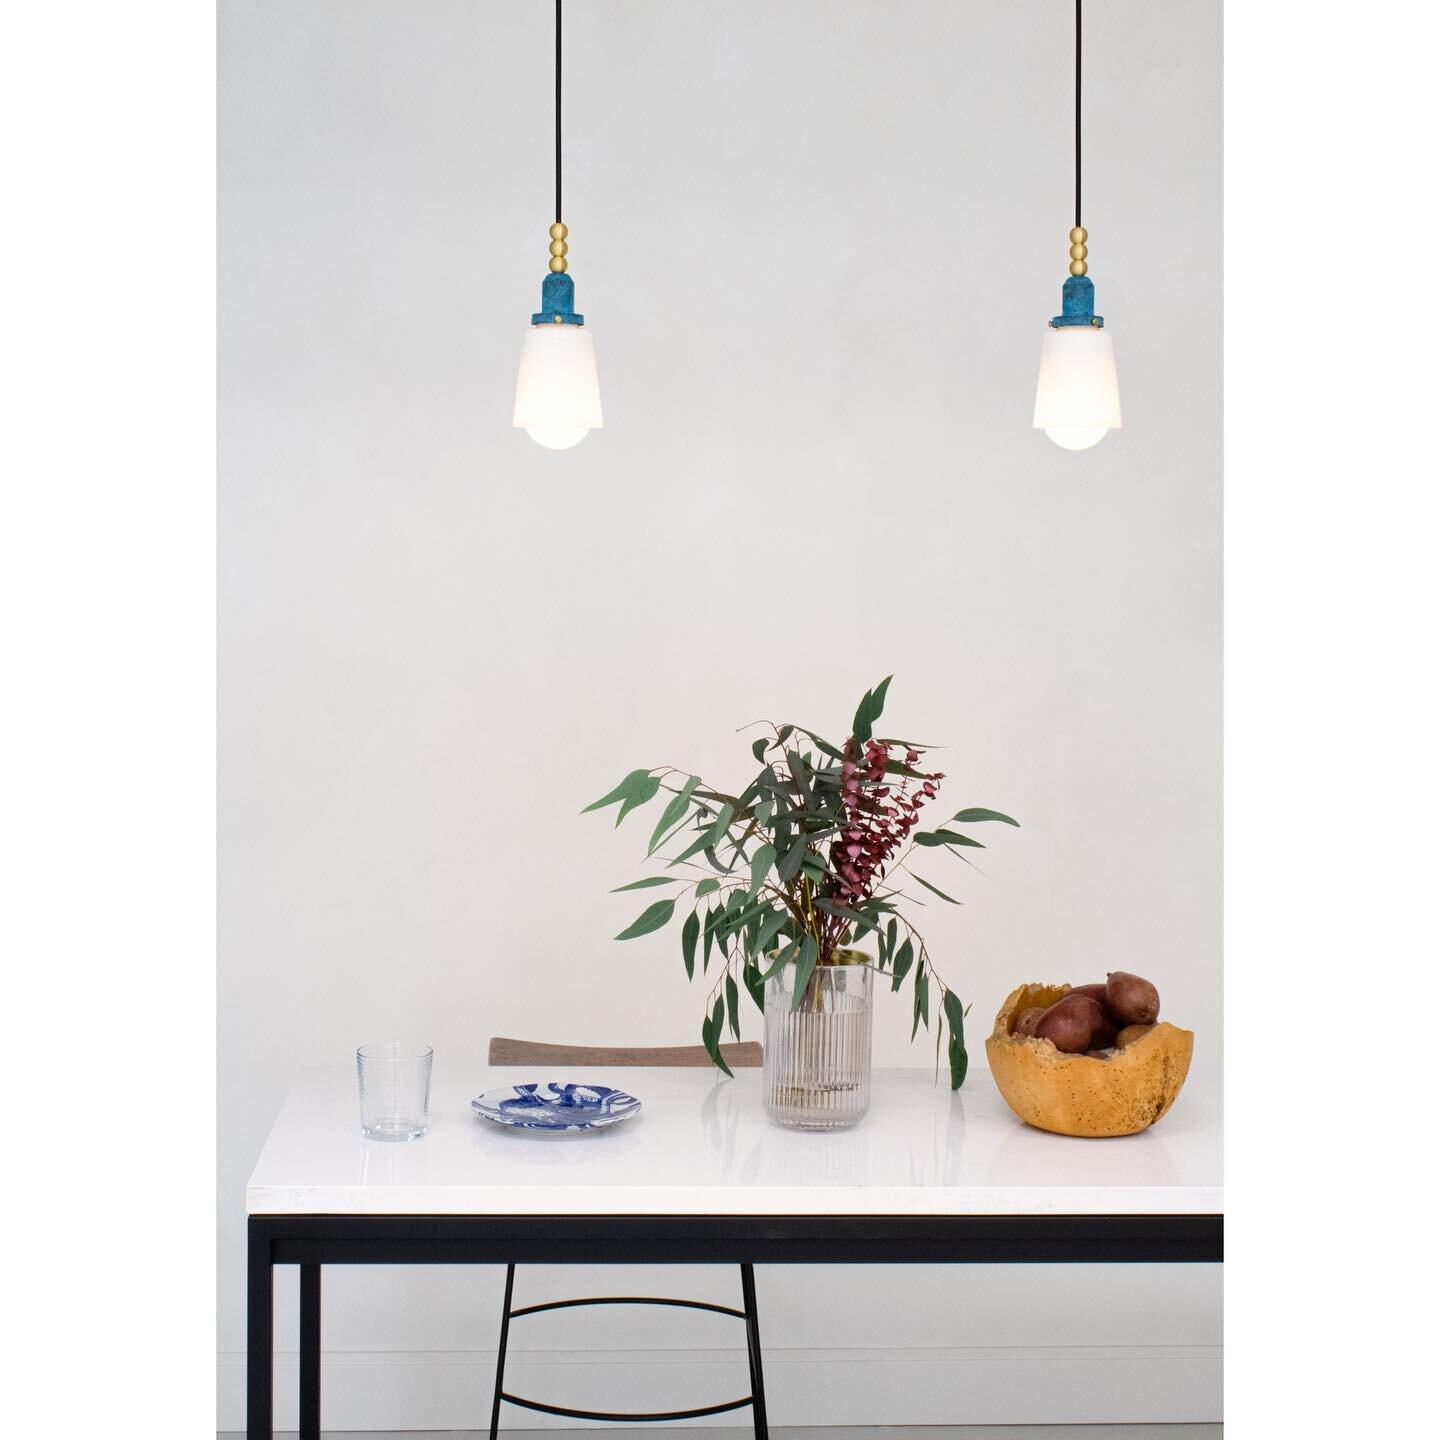 Produced by Trella&rsquo;s skilled team of artisans, the Therese Pendant light is a small vet versatile fixture. Perfect for use over bars, nightstands, kitchen islands, or any space in need of a warm inviting glow. The Therese pendant light features